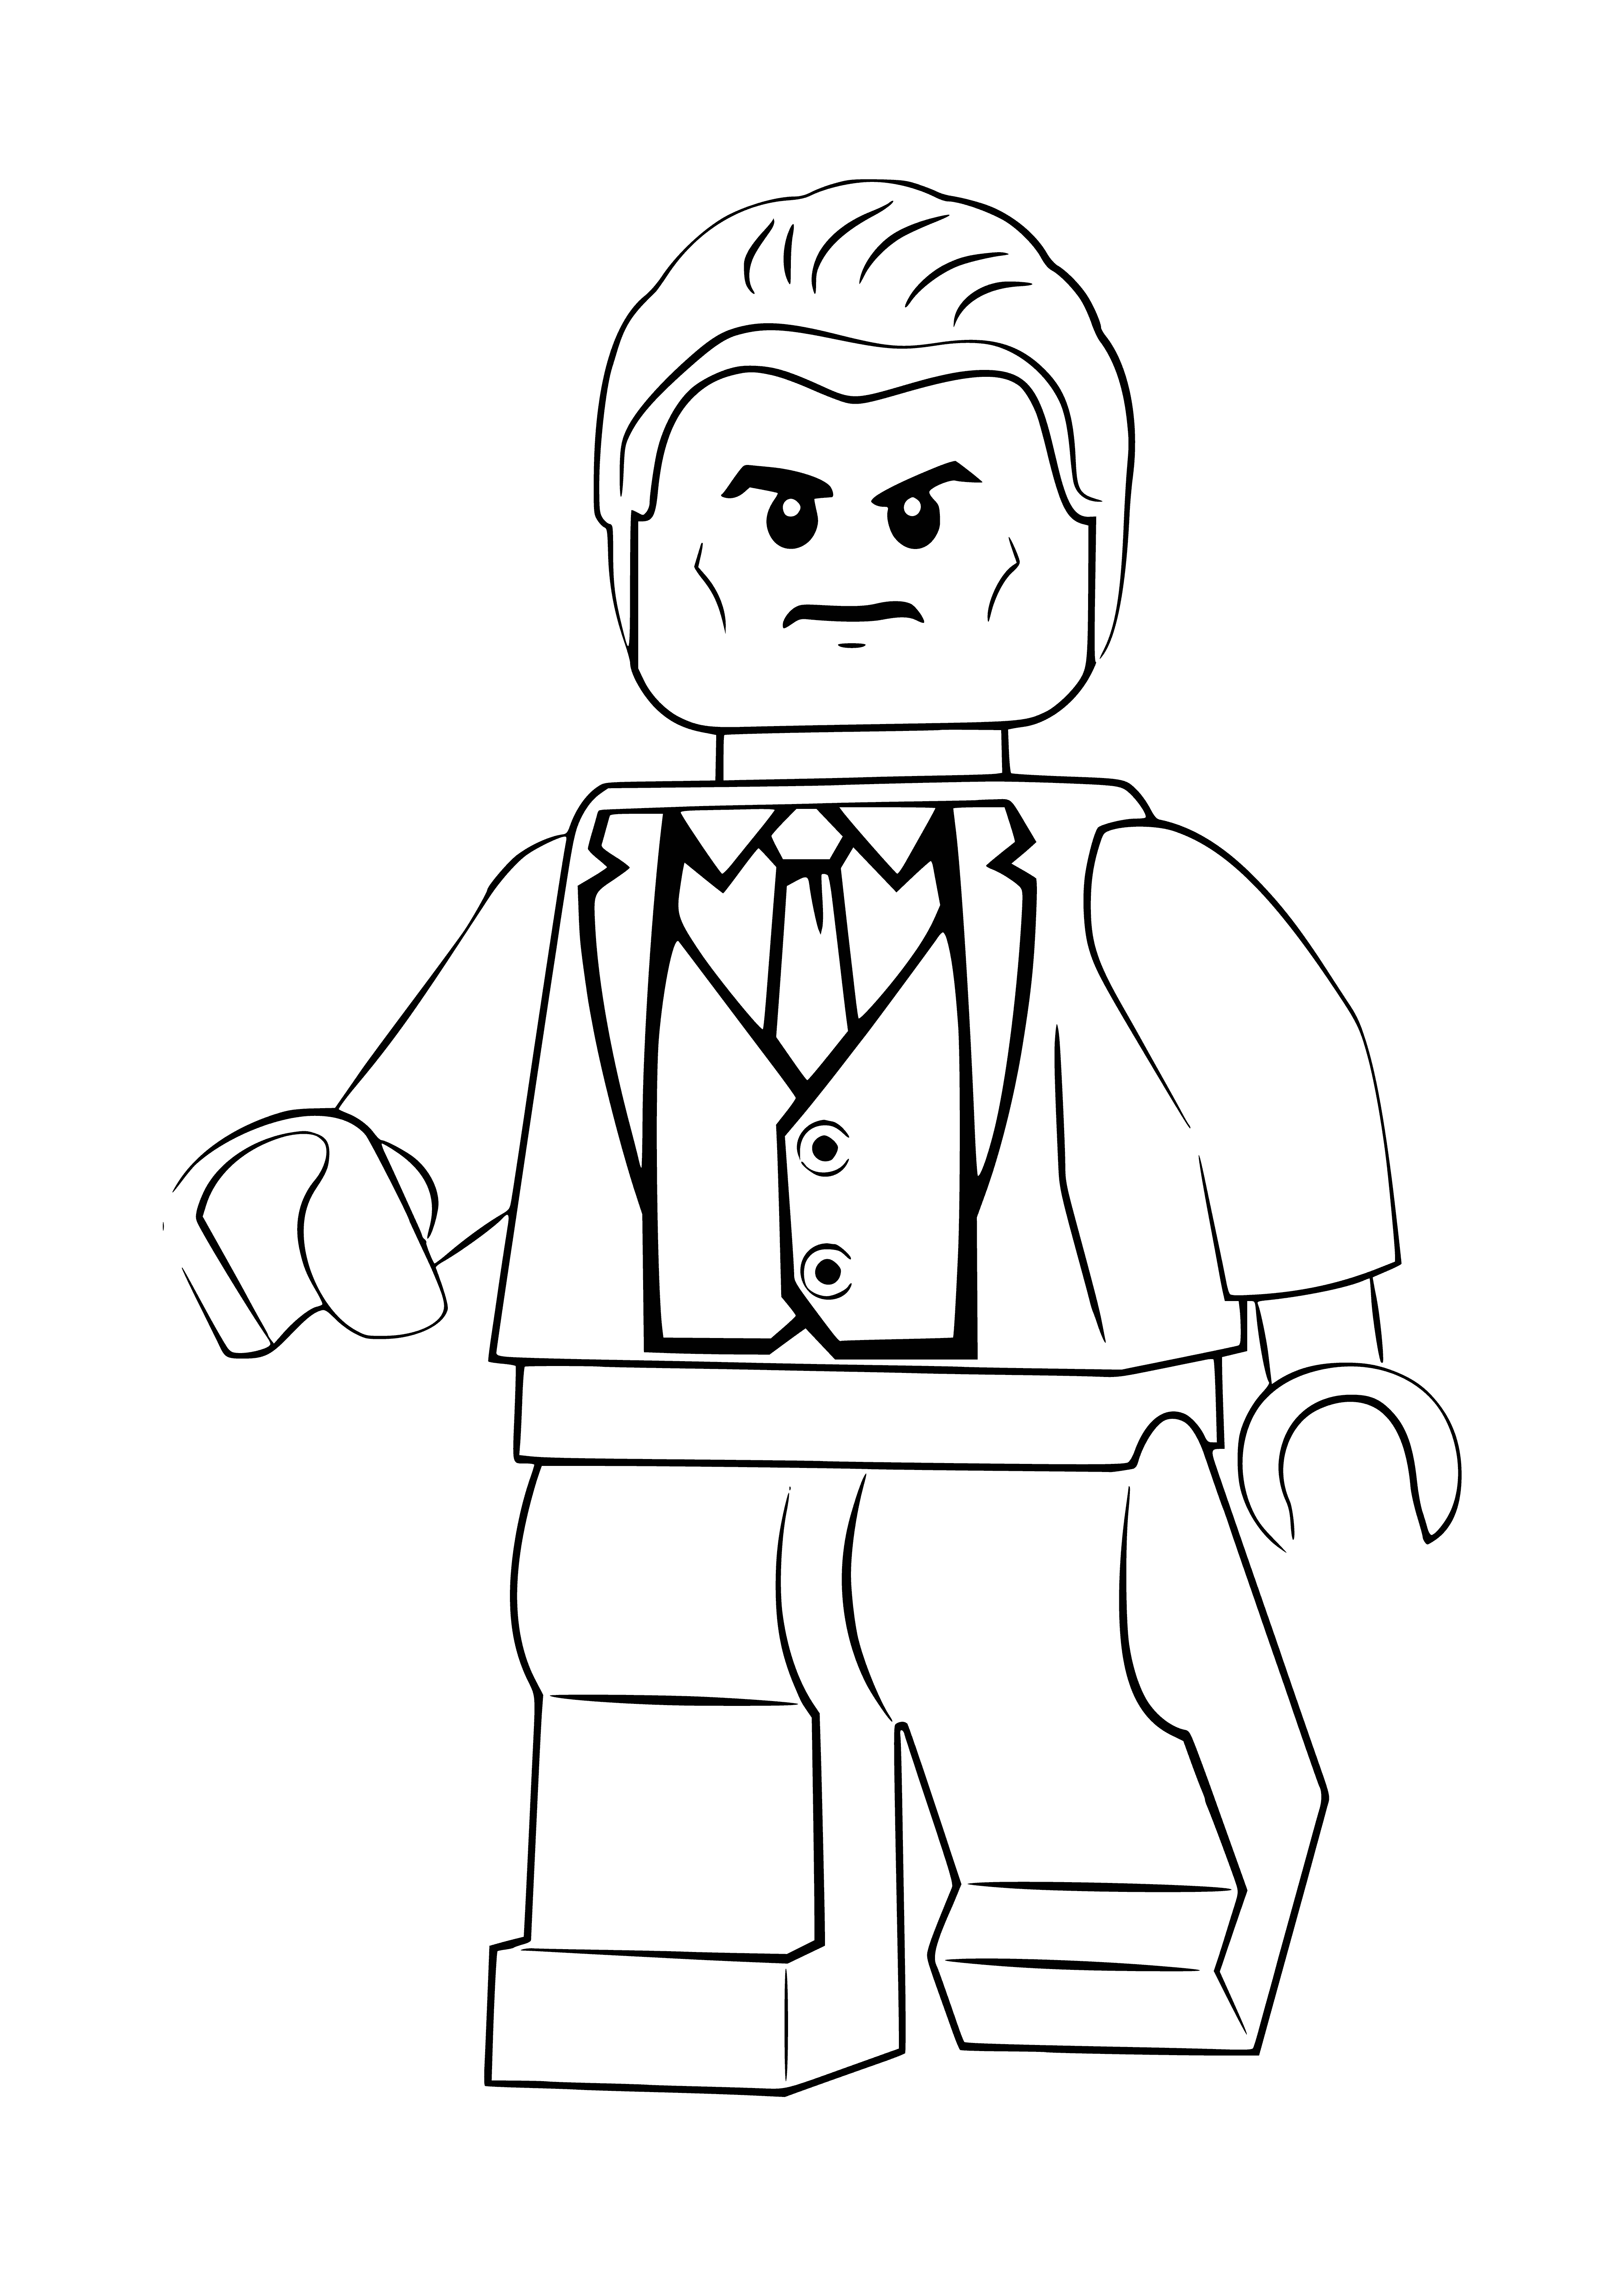 coloring page: Man in grey suit & black cape wearing black mask, Batman symbol on chest. Standing in front of large Lego blocks. #ColoringPage #Lego #Batman